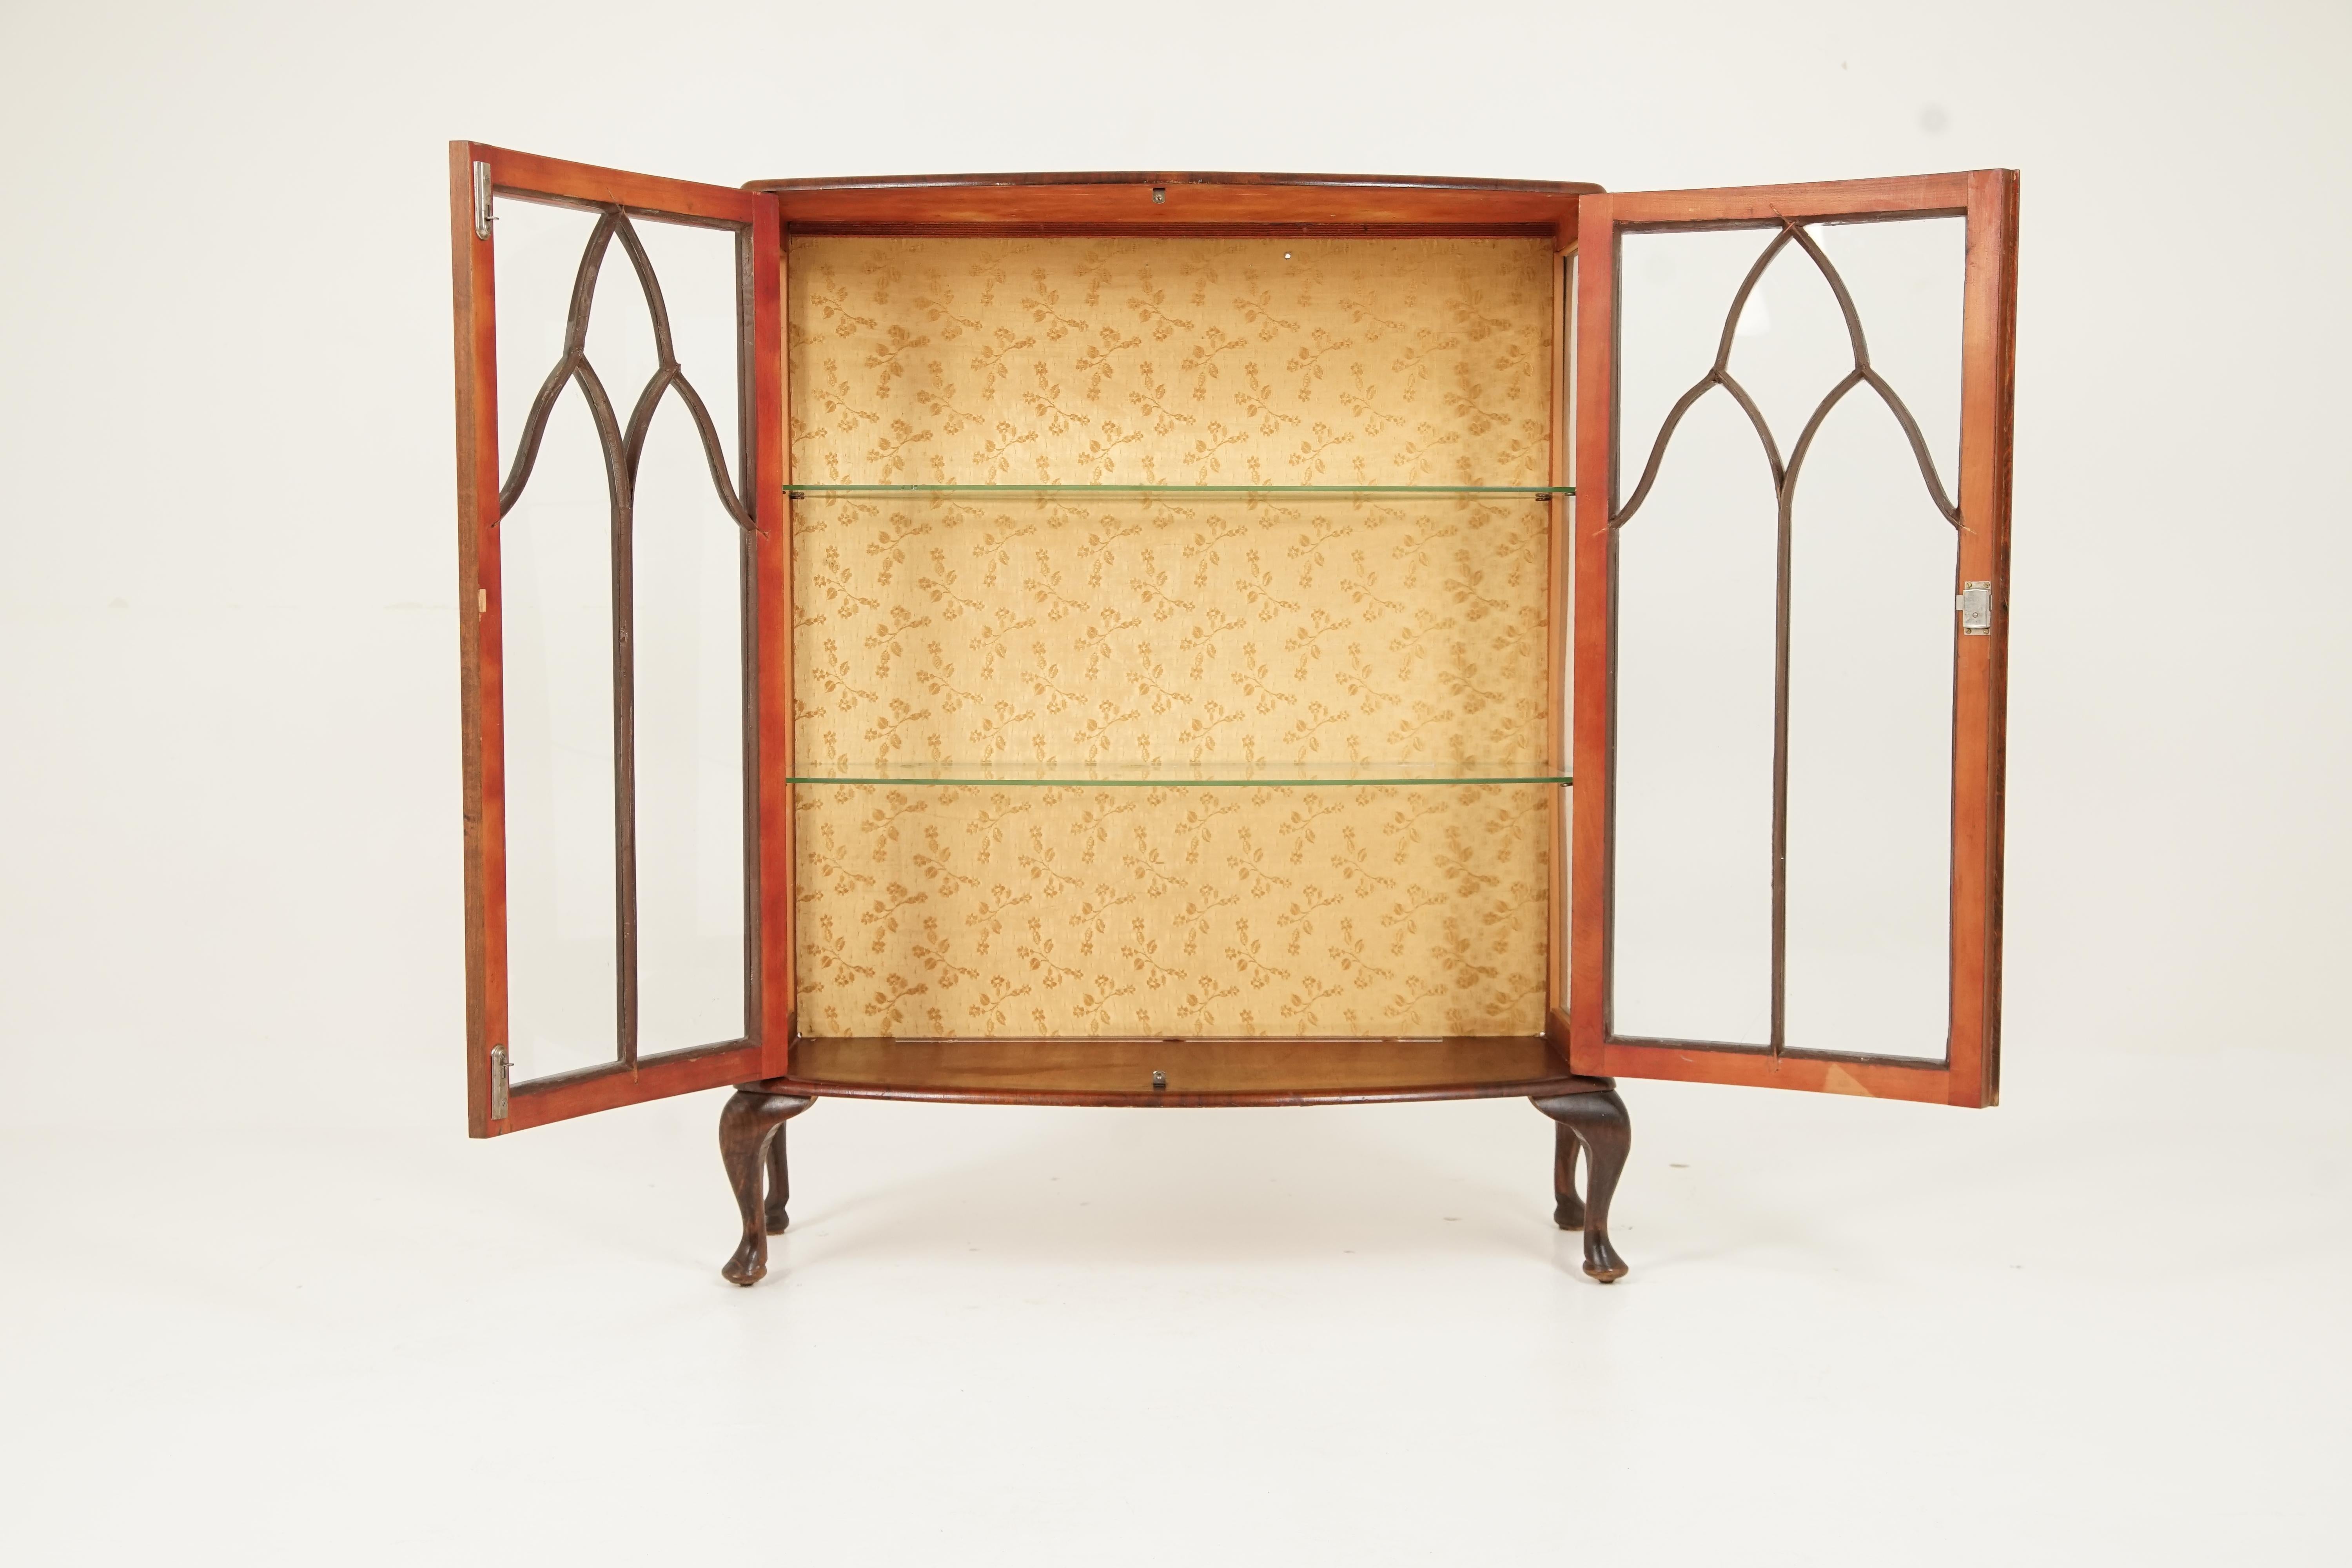 Antique Art Deco bow front China, Display Cabinet, Scotland 1930, B2735

Scotland 1930
Walnut and veneers
Original finish
Bow front walnut top with small pediment to the back
Pair of original glass with shaped moulding to the front
Pair of